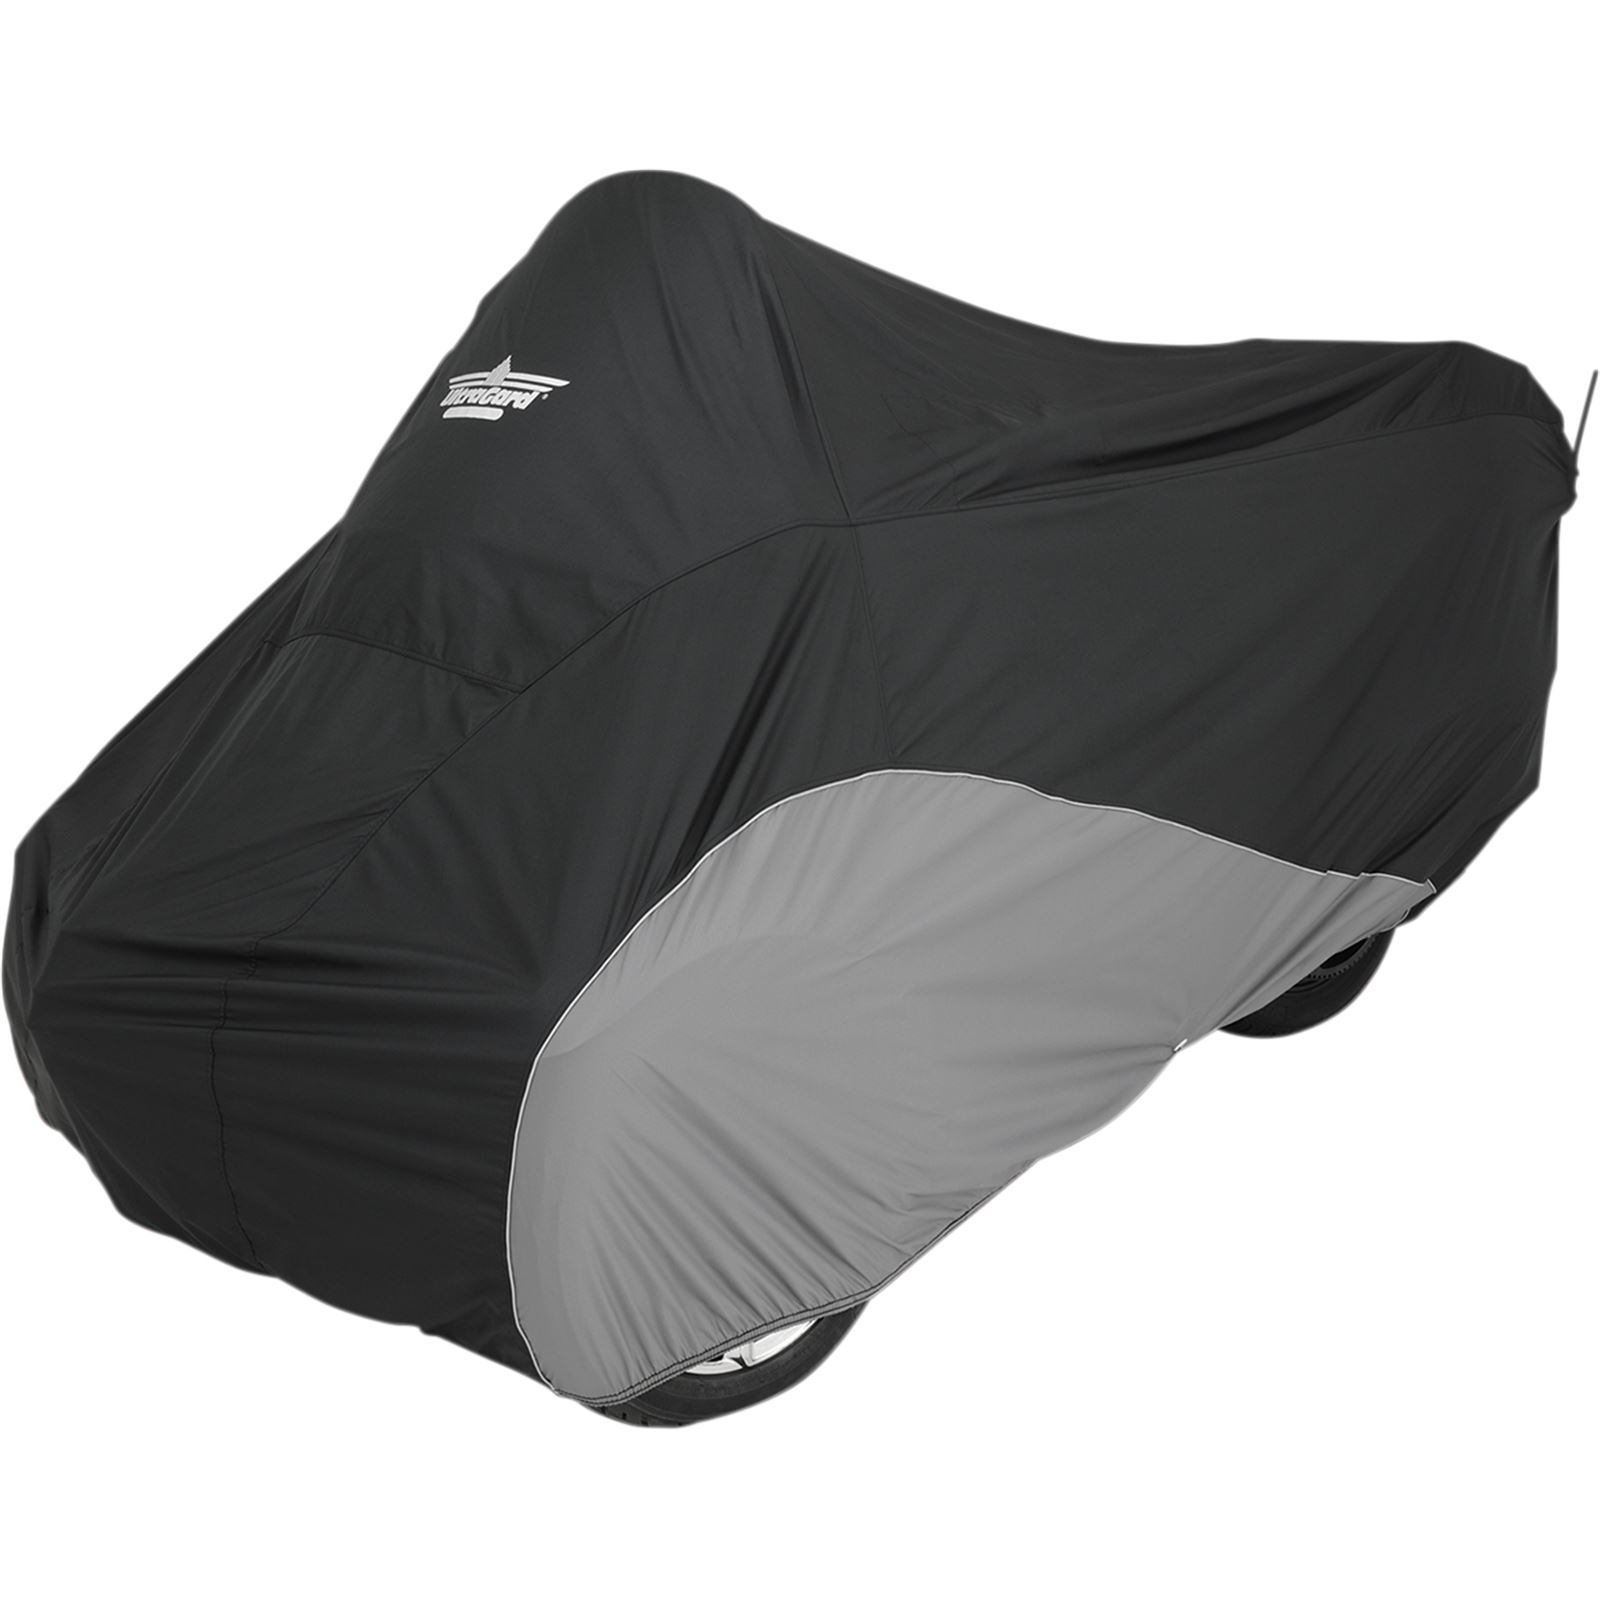 Ultragard Can-Am F3 Cover - Black/Charcoal